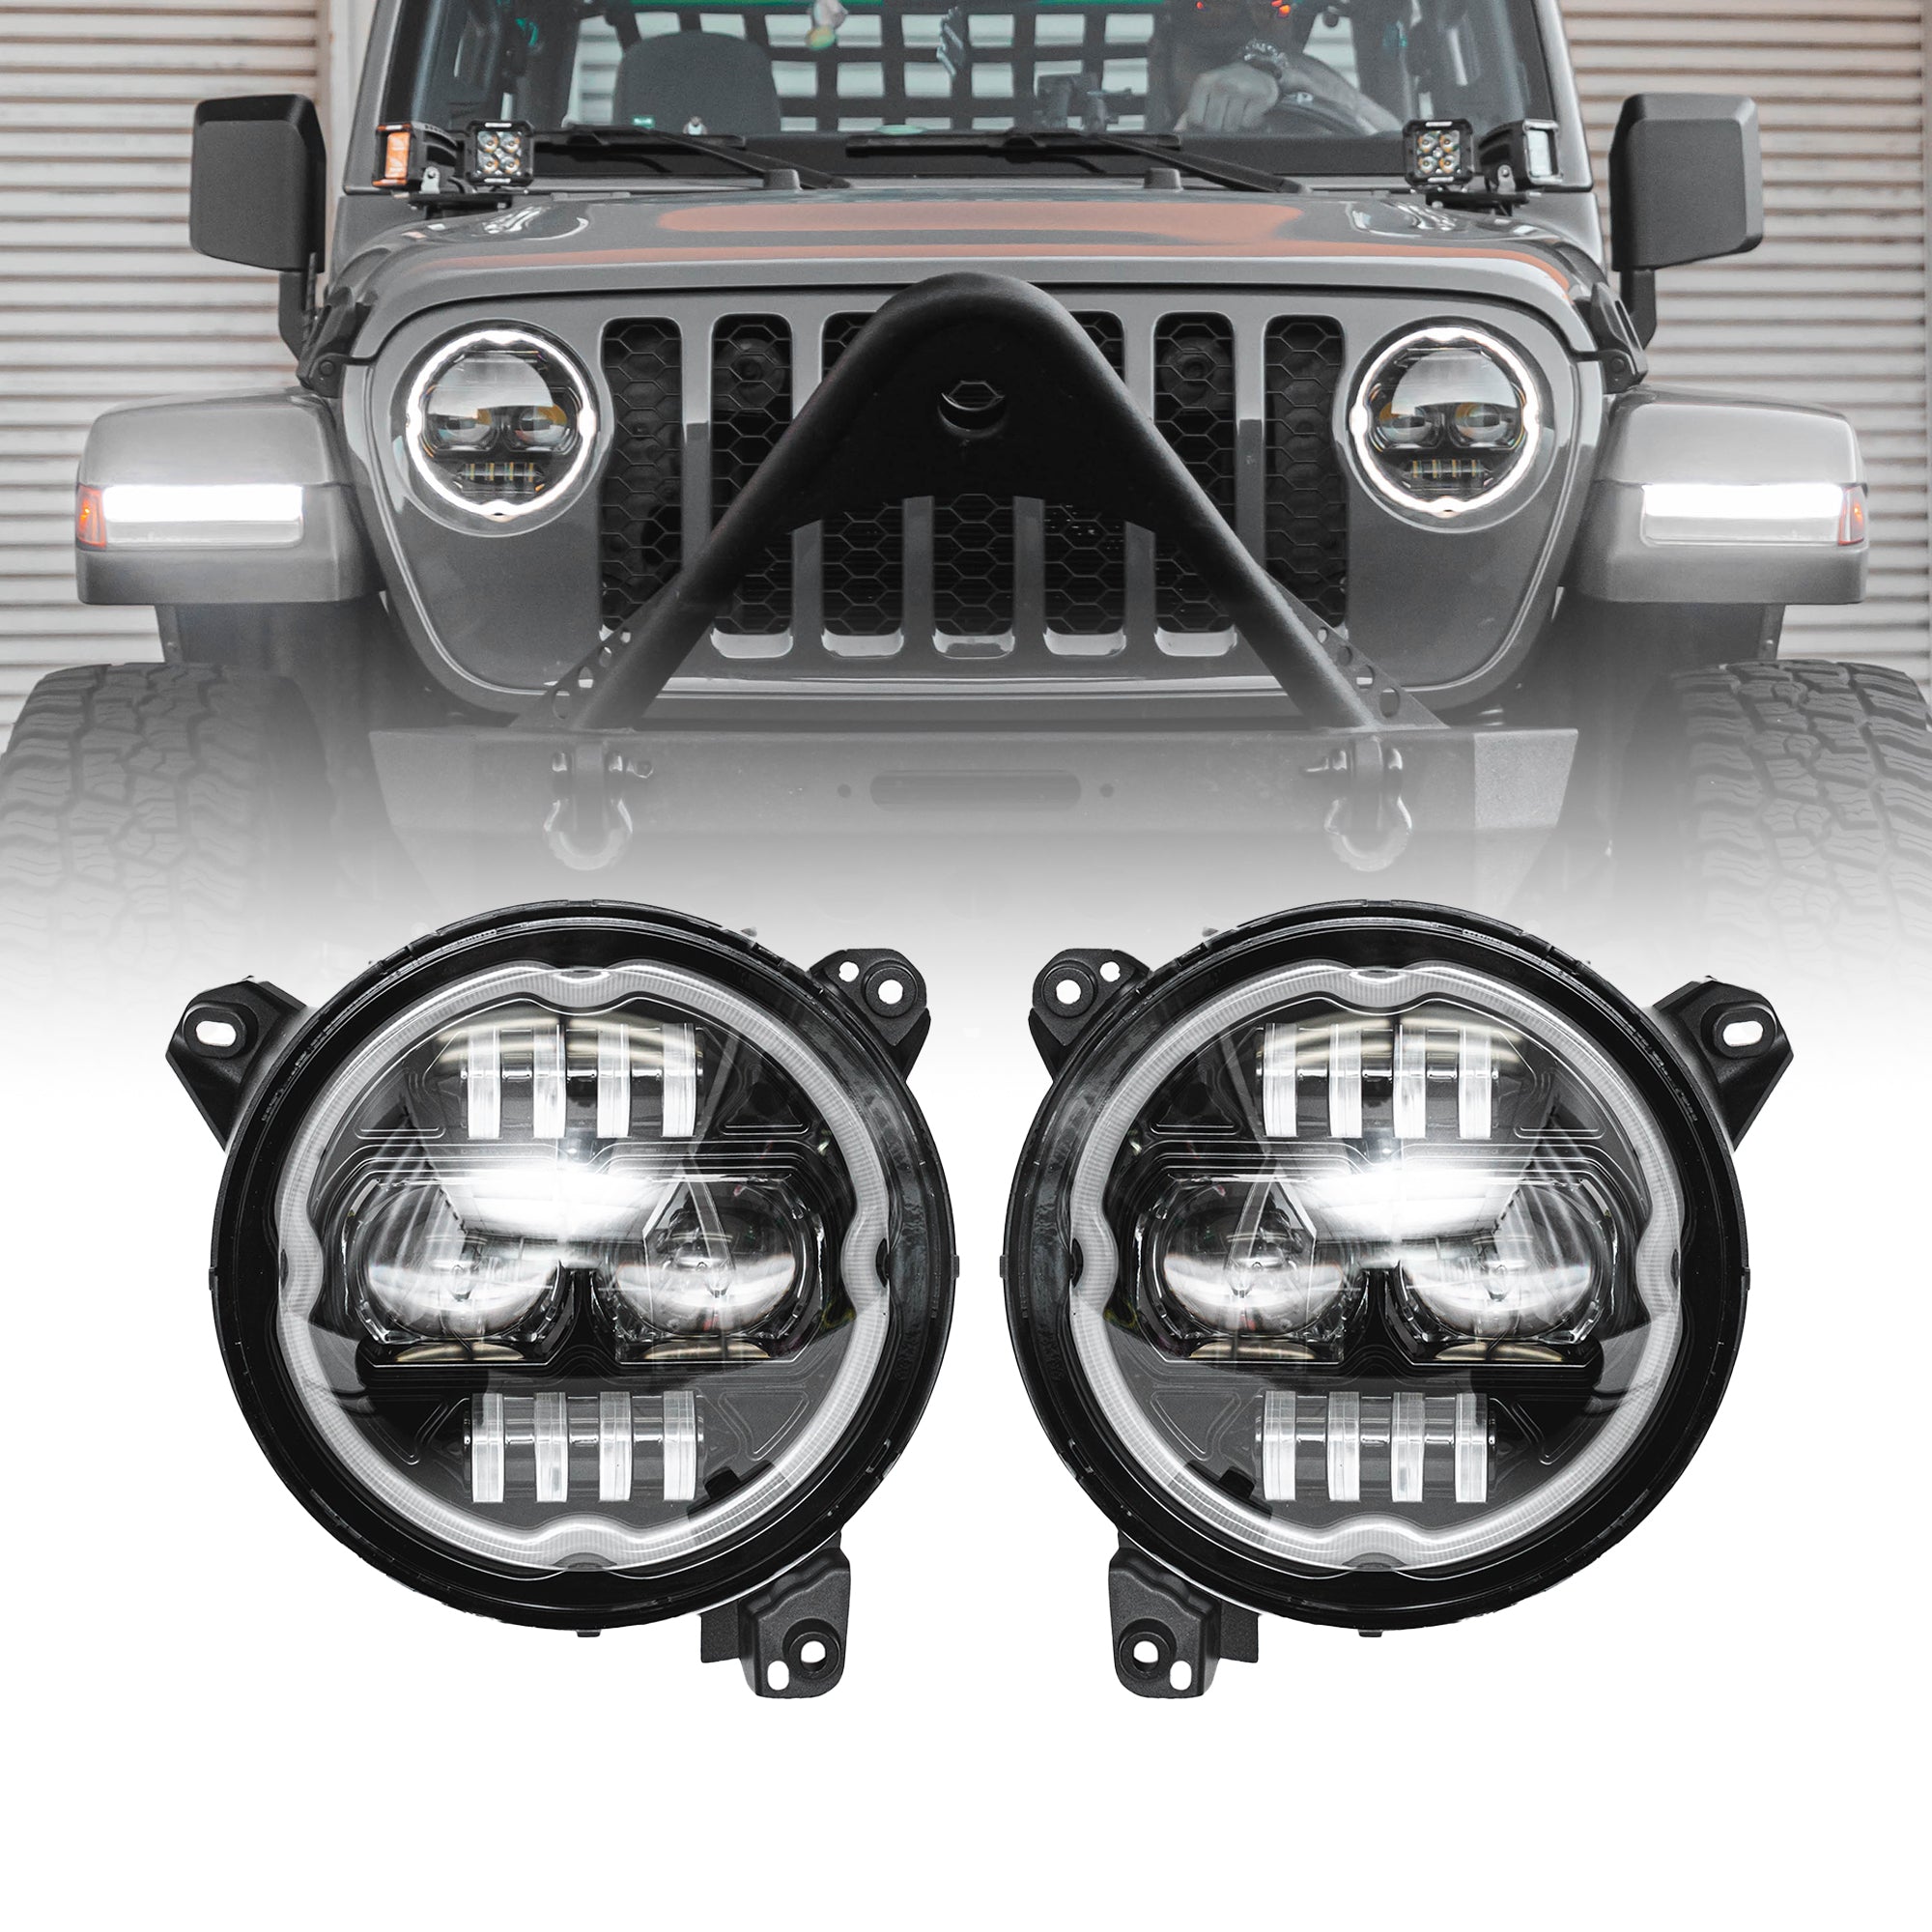 Jeep Lights and Parts for Wrangler & Gladiator